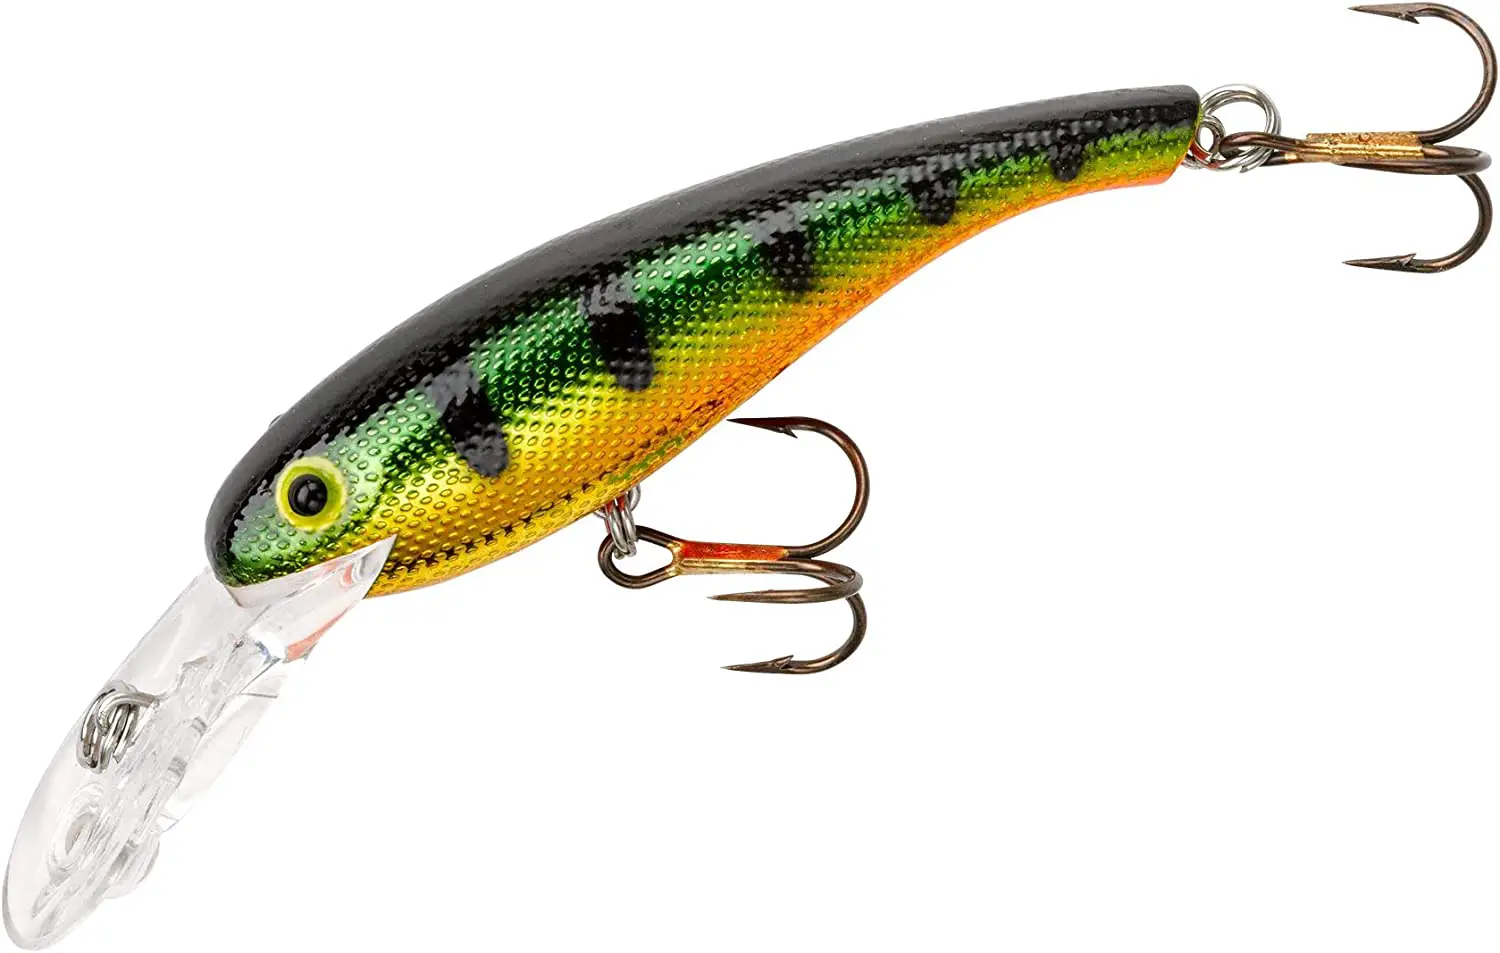 Cotton Cordell Wally Diver: One of the best walleye fishing lures